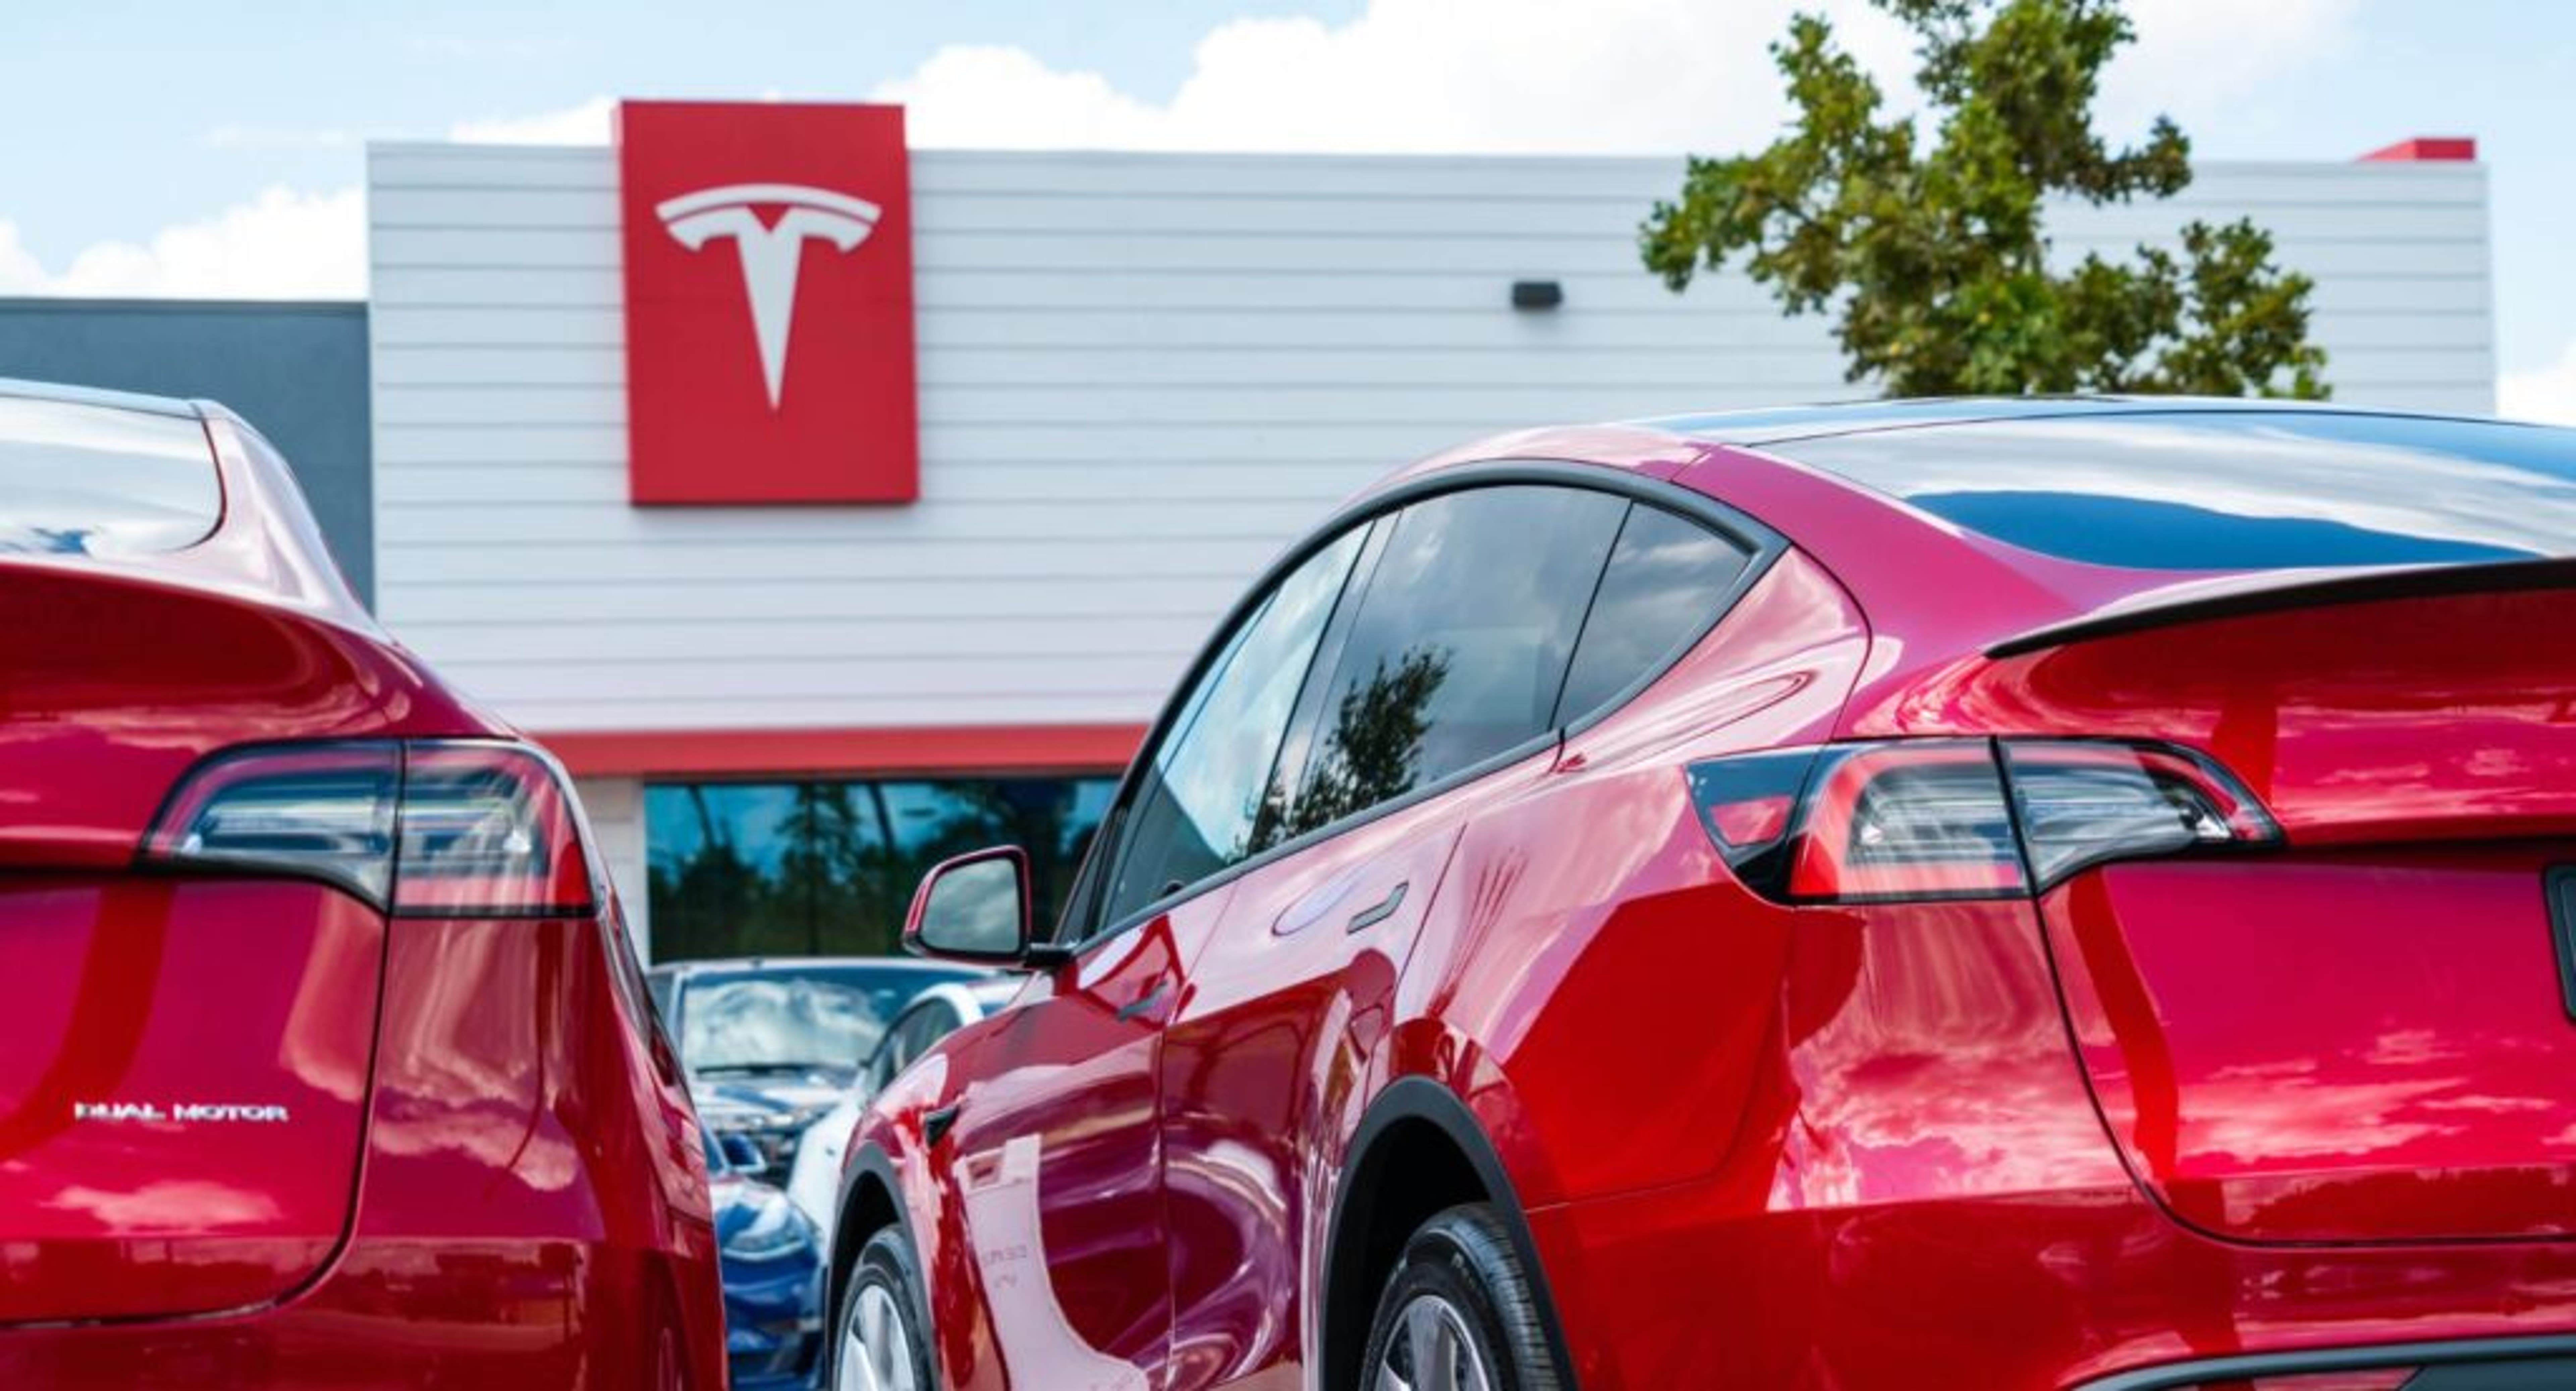 Tesla Sets Up For India Entry: Plans For Local Assembly And Vendor Base On The Horizon